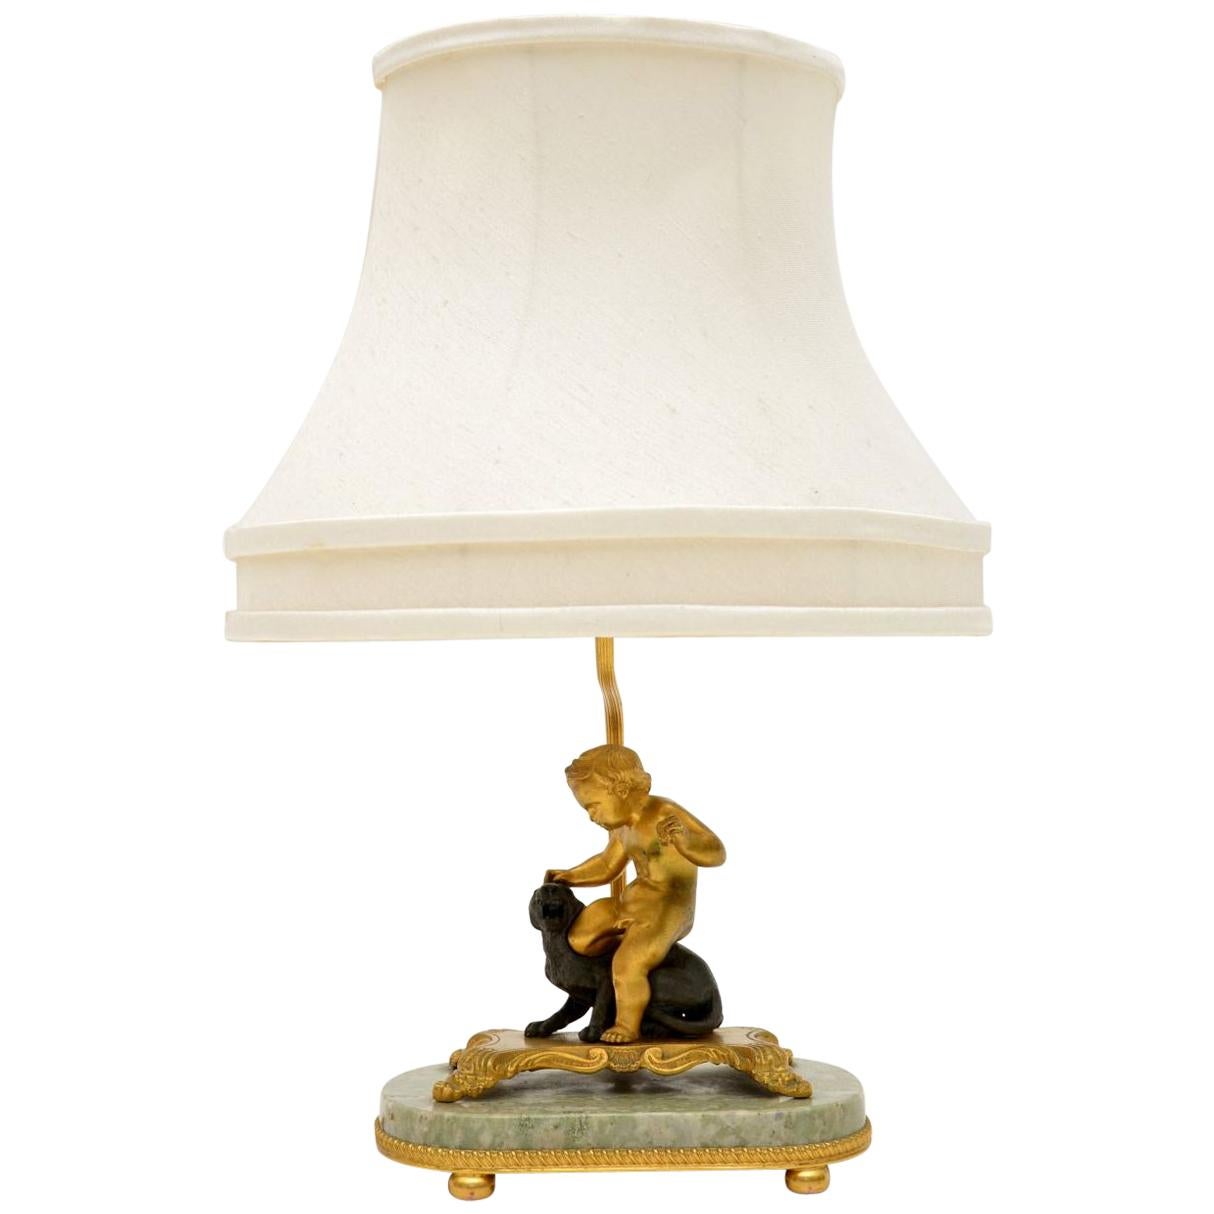  Antique French Gilt Bronze Table Lamp